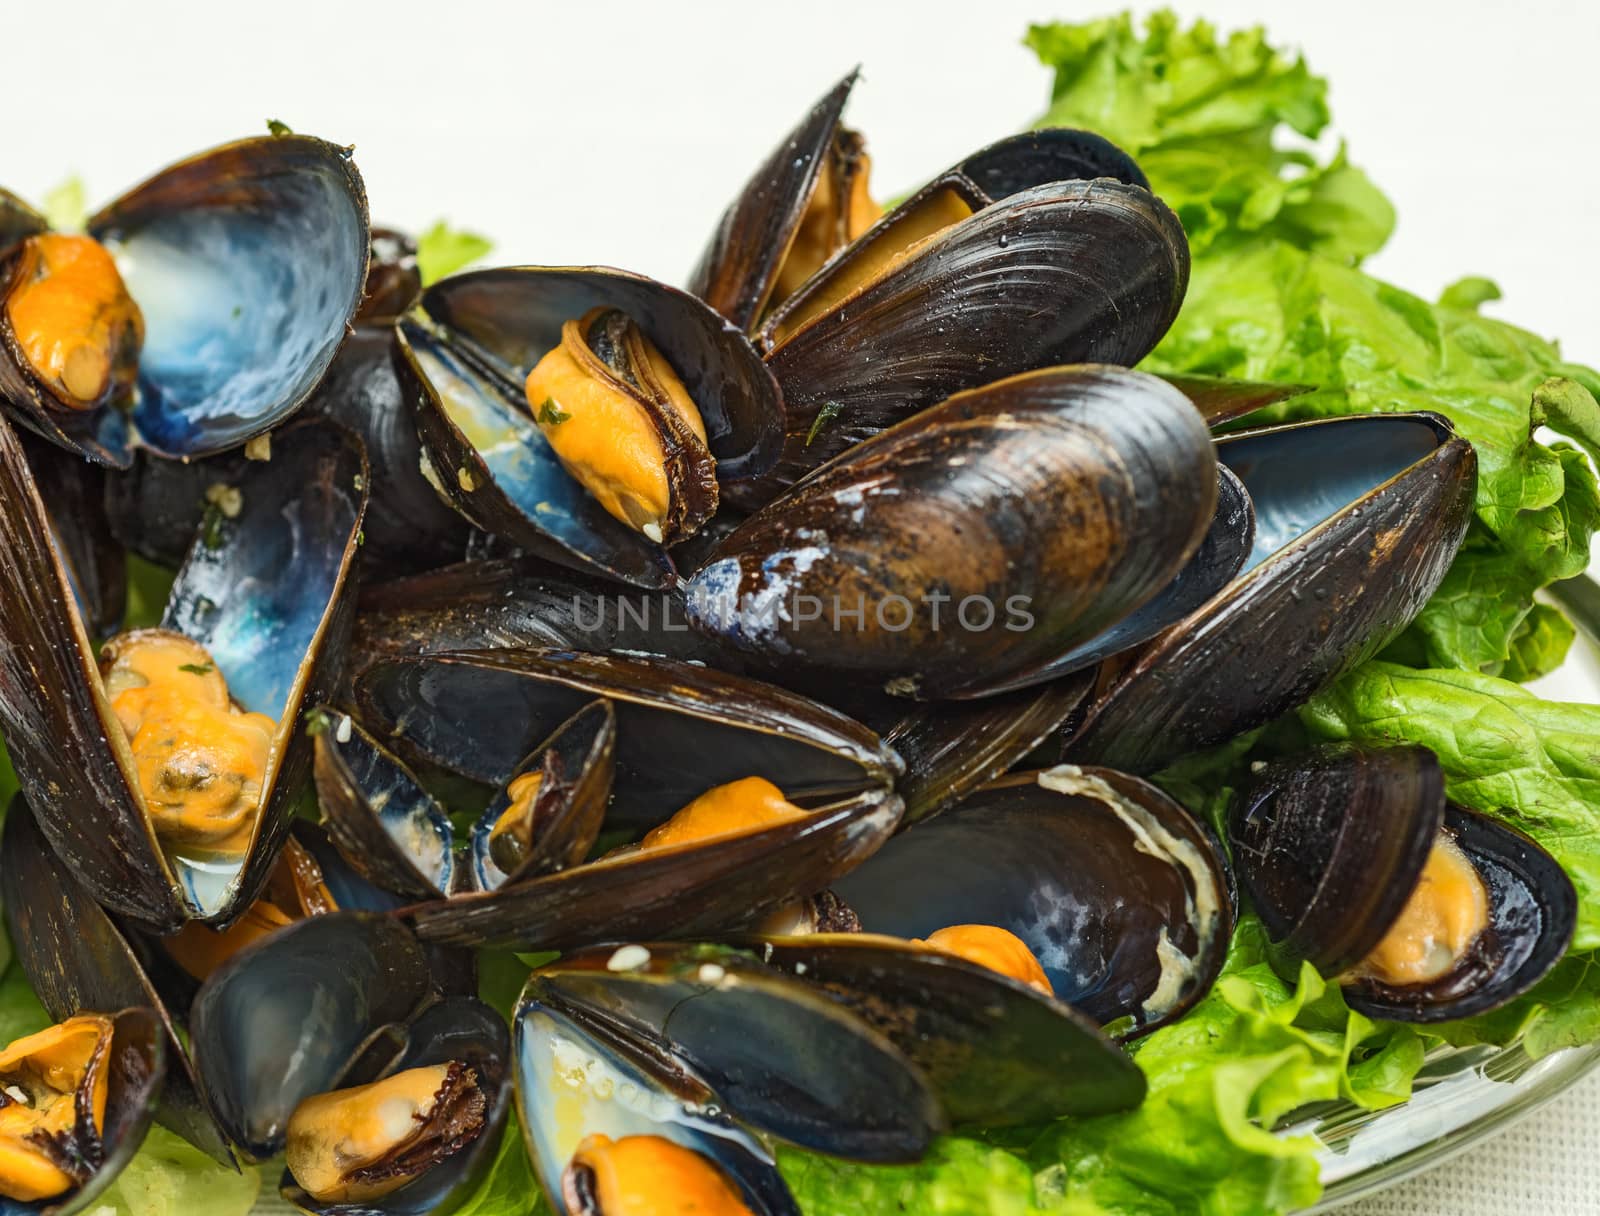 This is a plate of steamed mussels with lettuce leaves on a plate